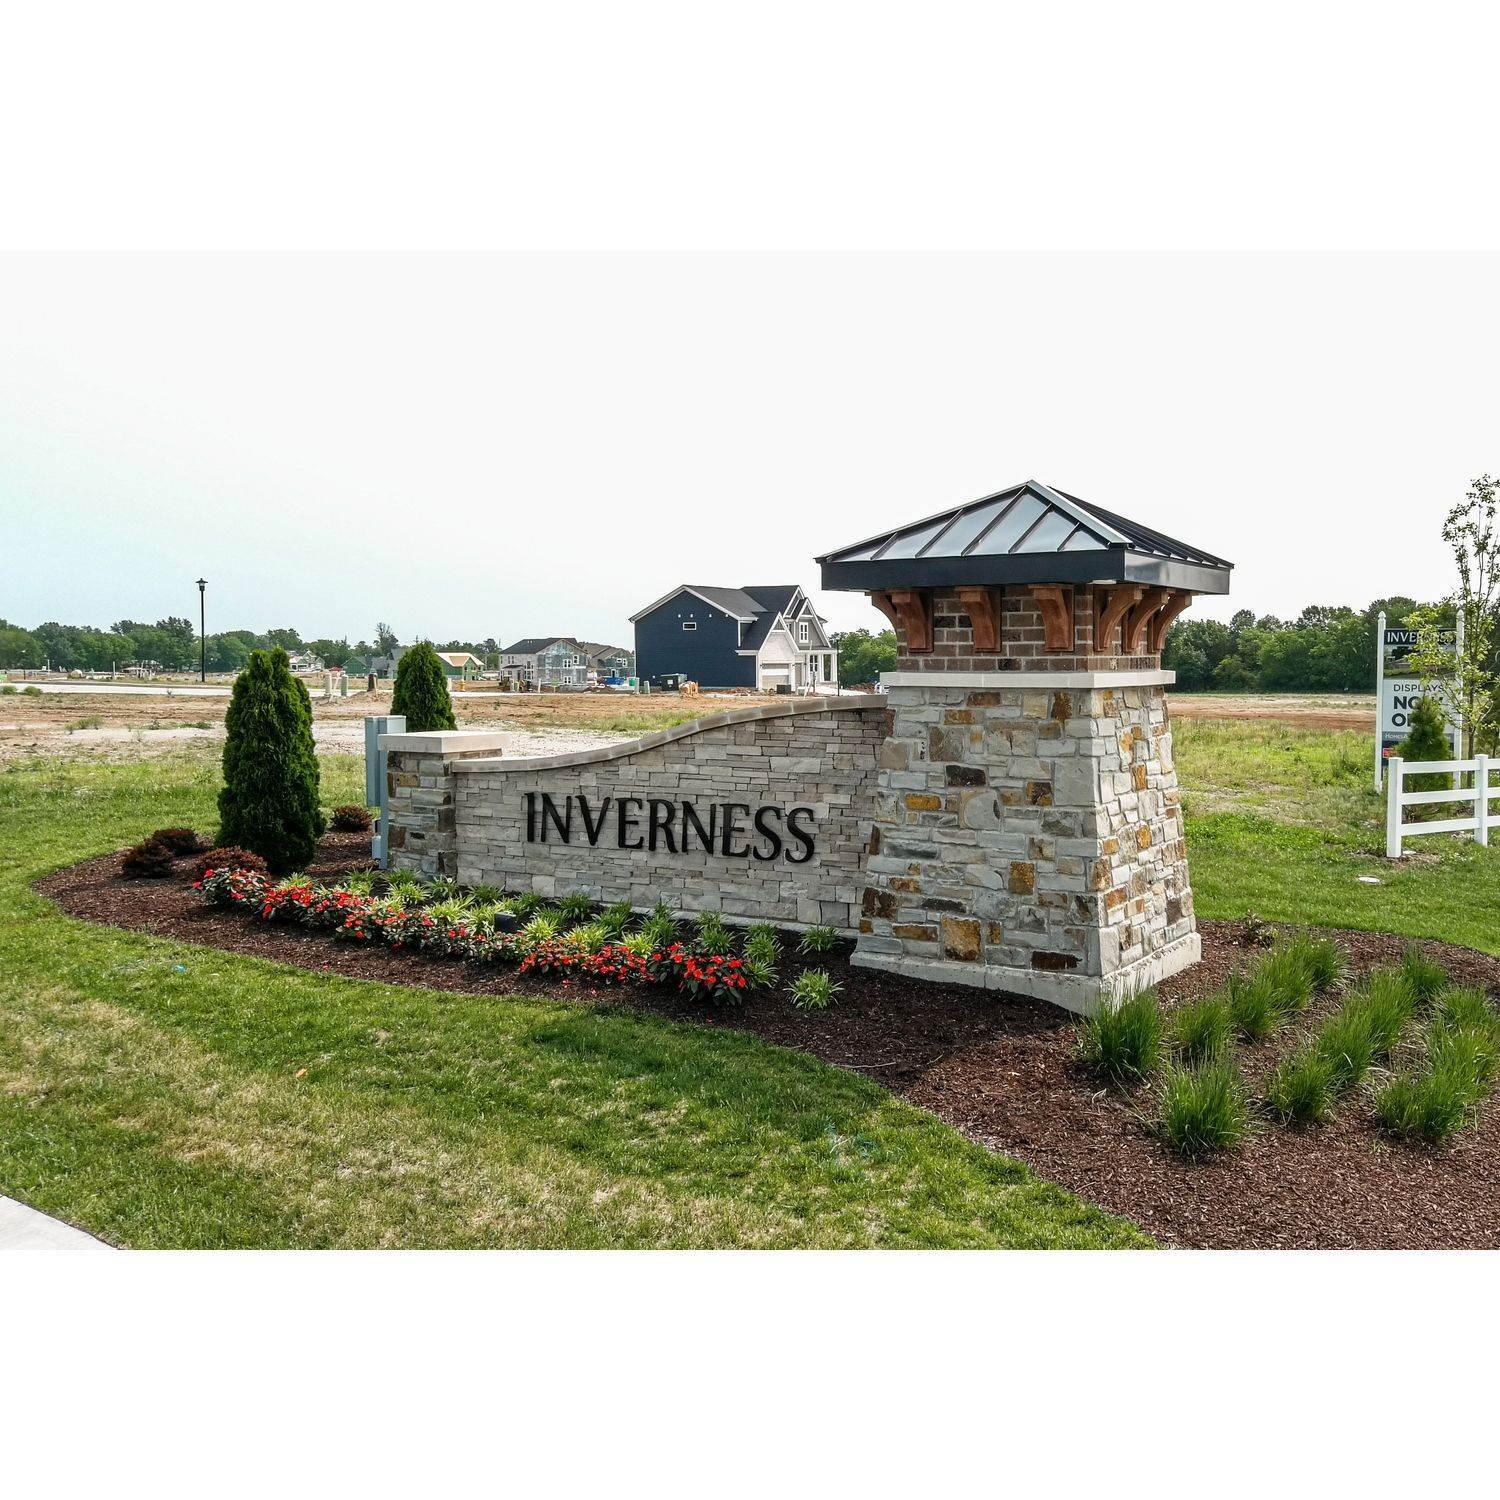 3. xây dựng tại 100 Royal Inverness Parkway, Dardenne Prairie, MO 63368